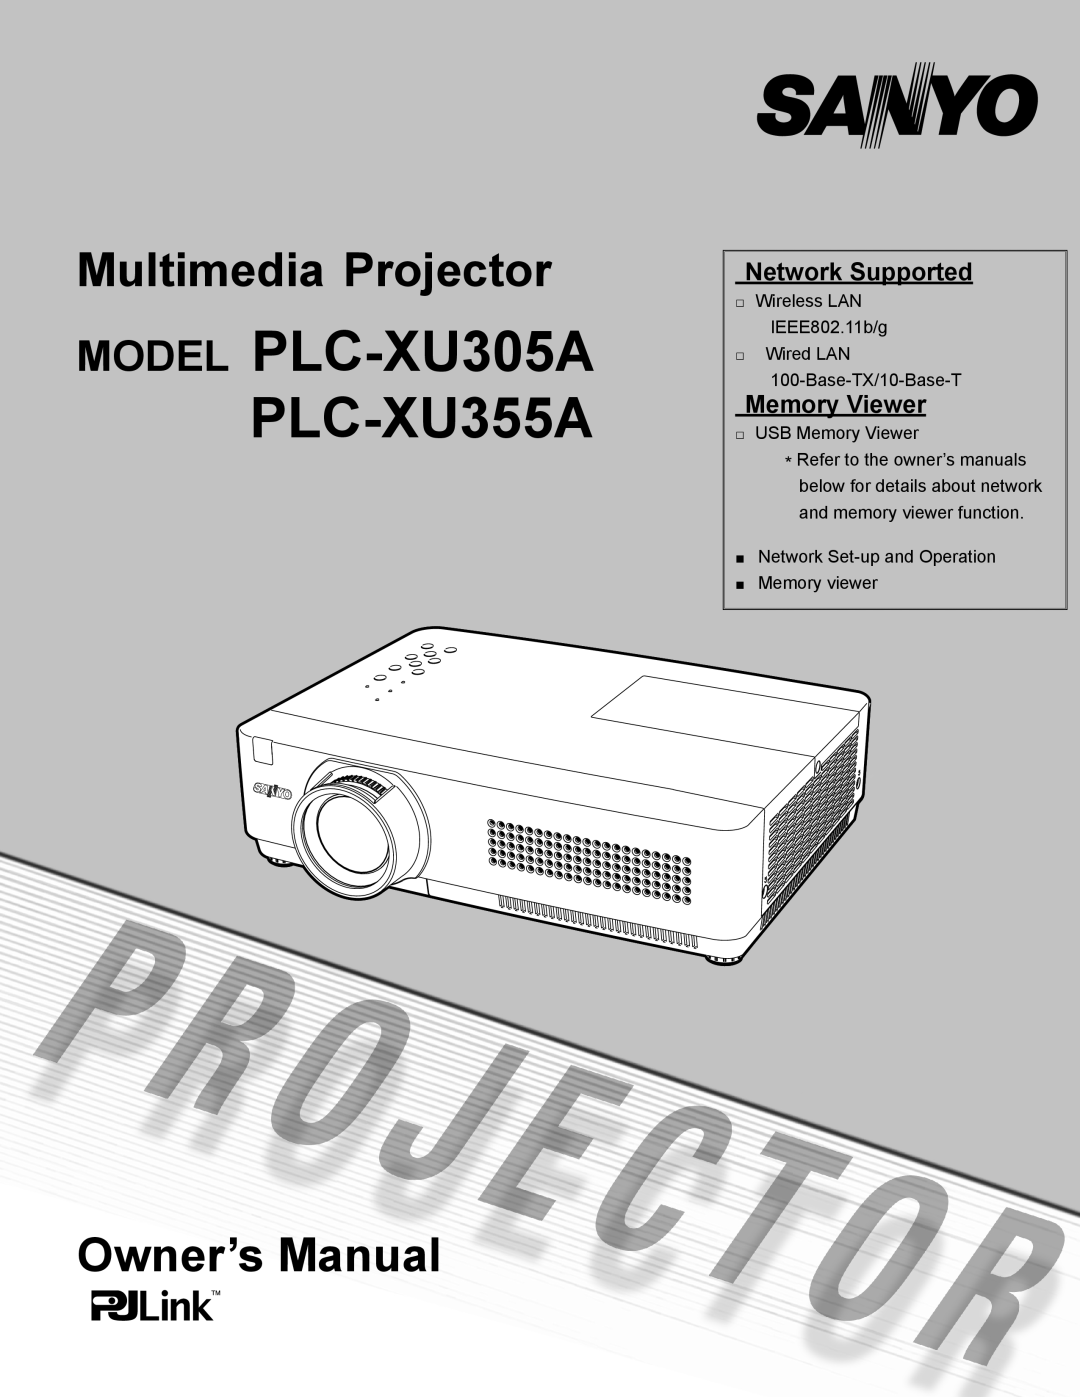 Sanyo owner manual Network Supported, Memory Viewer, MODEL PLC-XU305A PLC-XU355A, Multimedia Projector, Owner’s Manual 